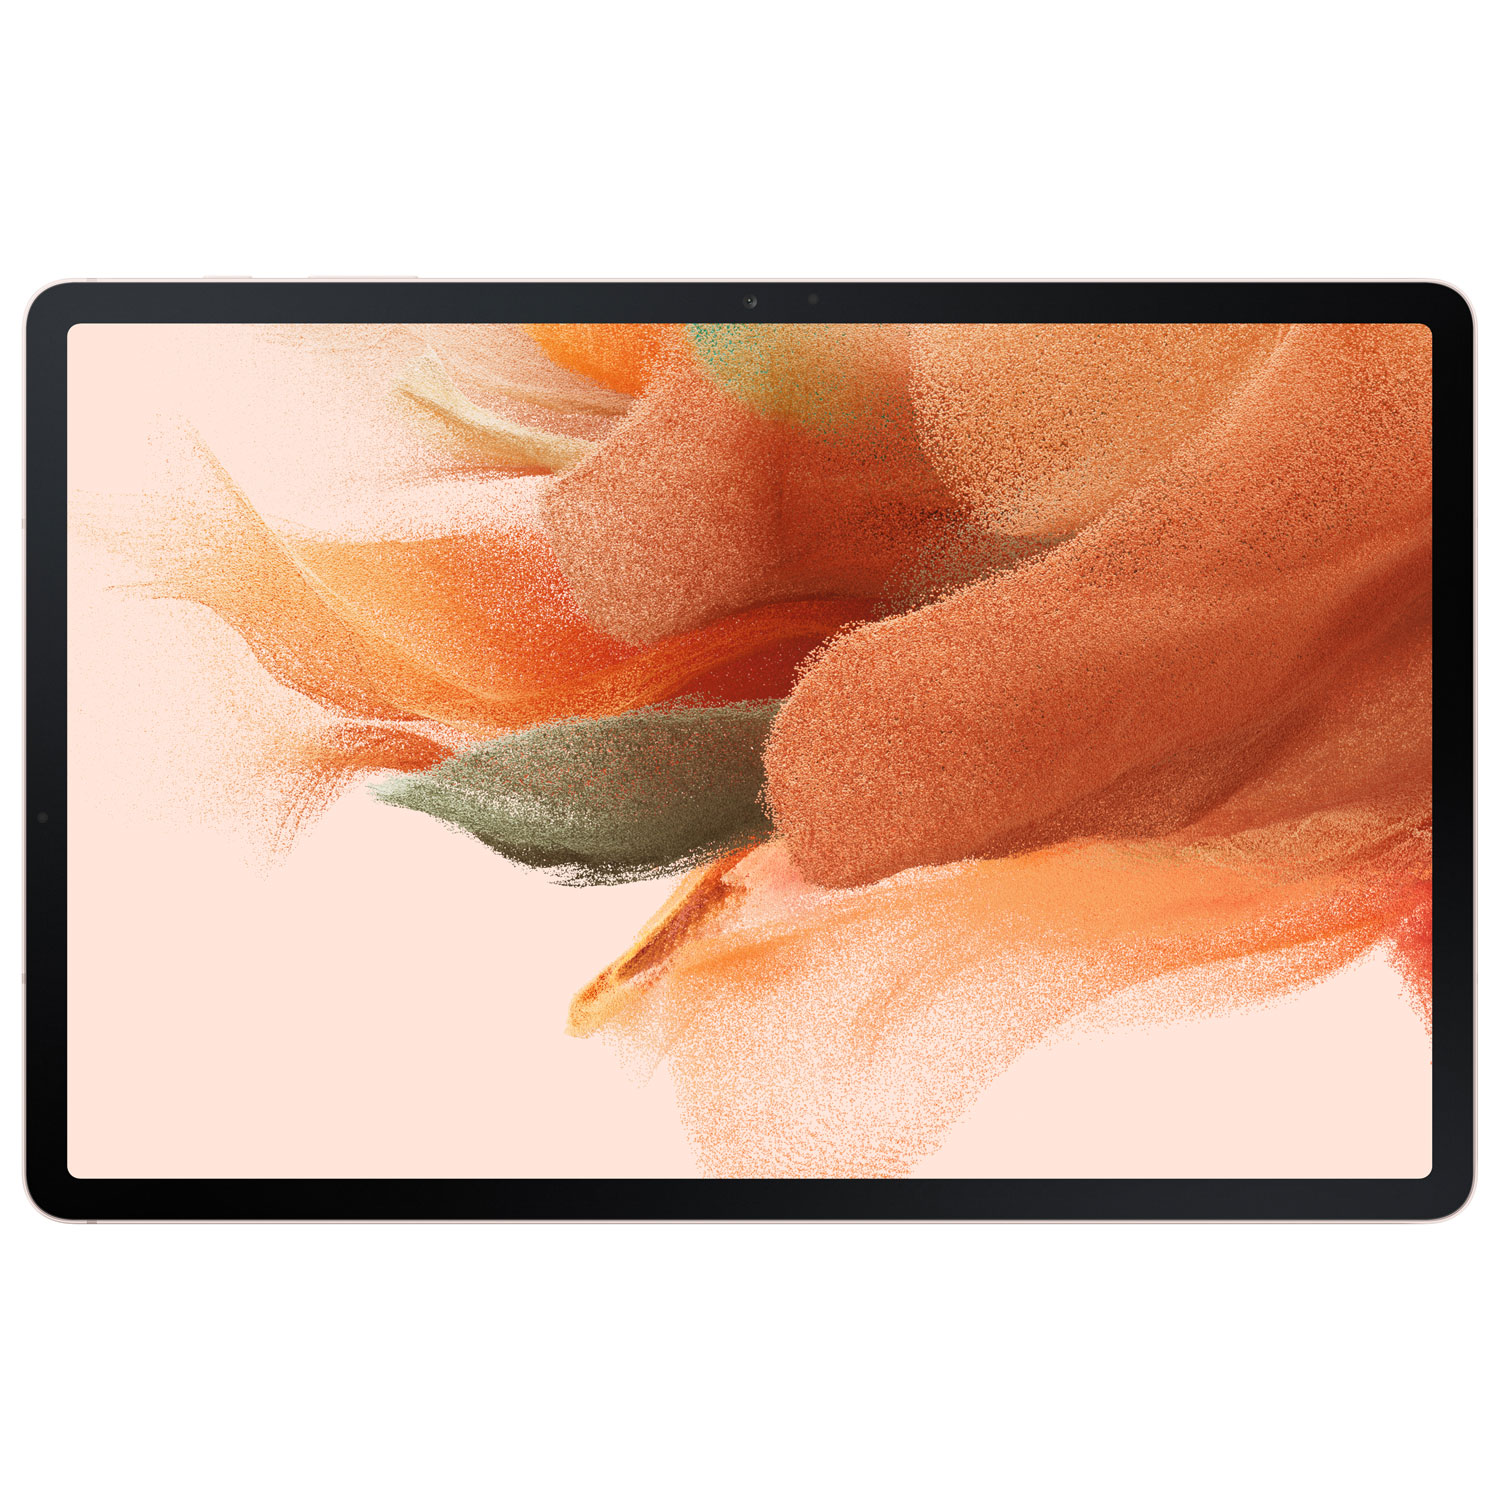 Samsung Galaxy Tab S7 FE 12.4" 64GB Android 11 Tablet - Pink - Exclusive Retail Partner